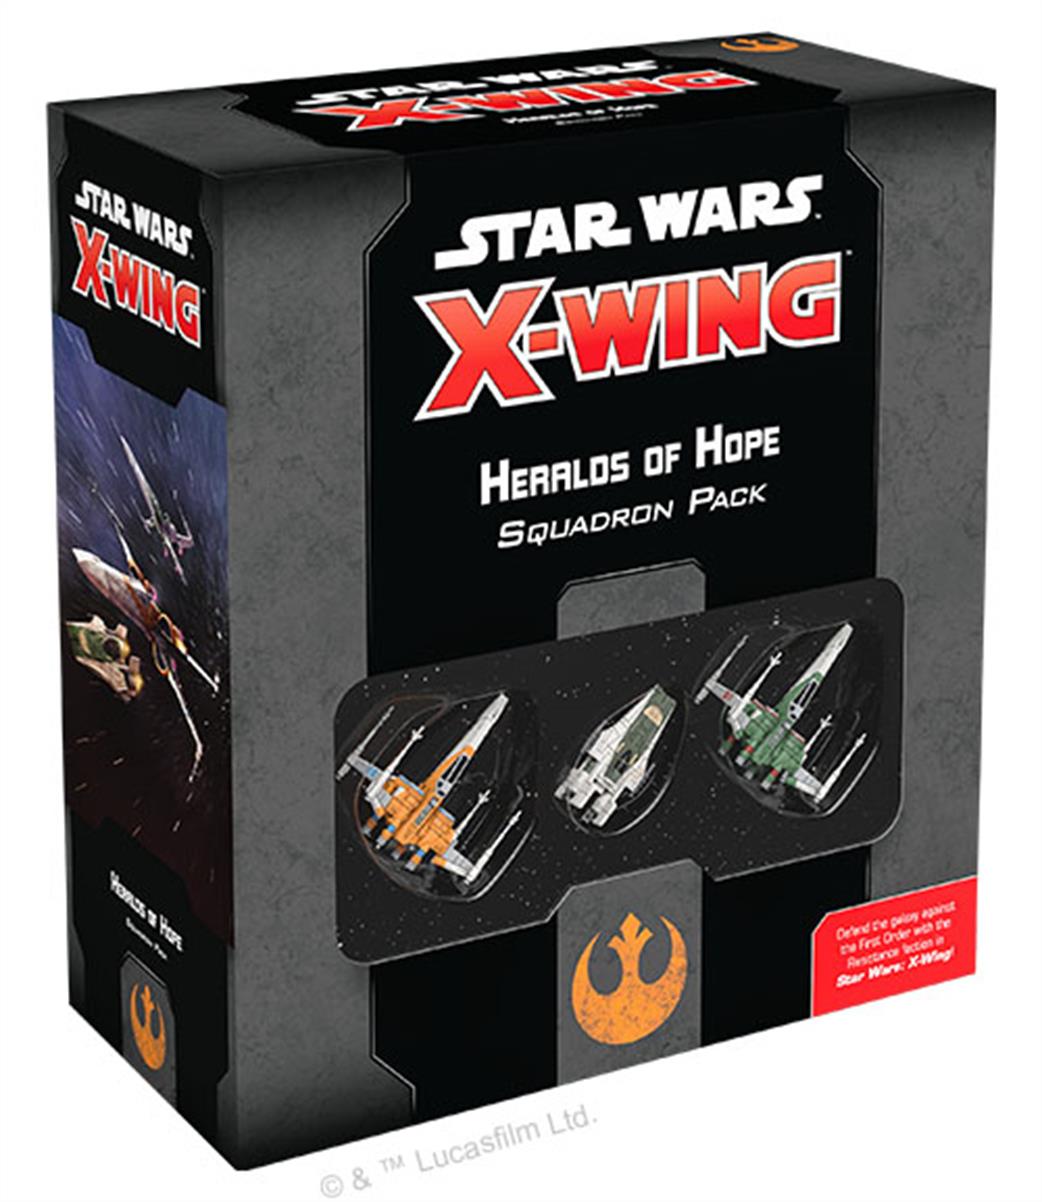 Fantasy Flight Games  SWZ68 Heralds of Hope Squadron Pack from Star Wars X-Wing 2nd Ed